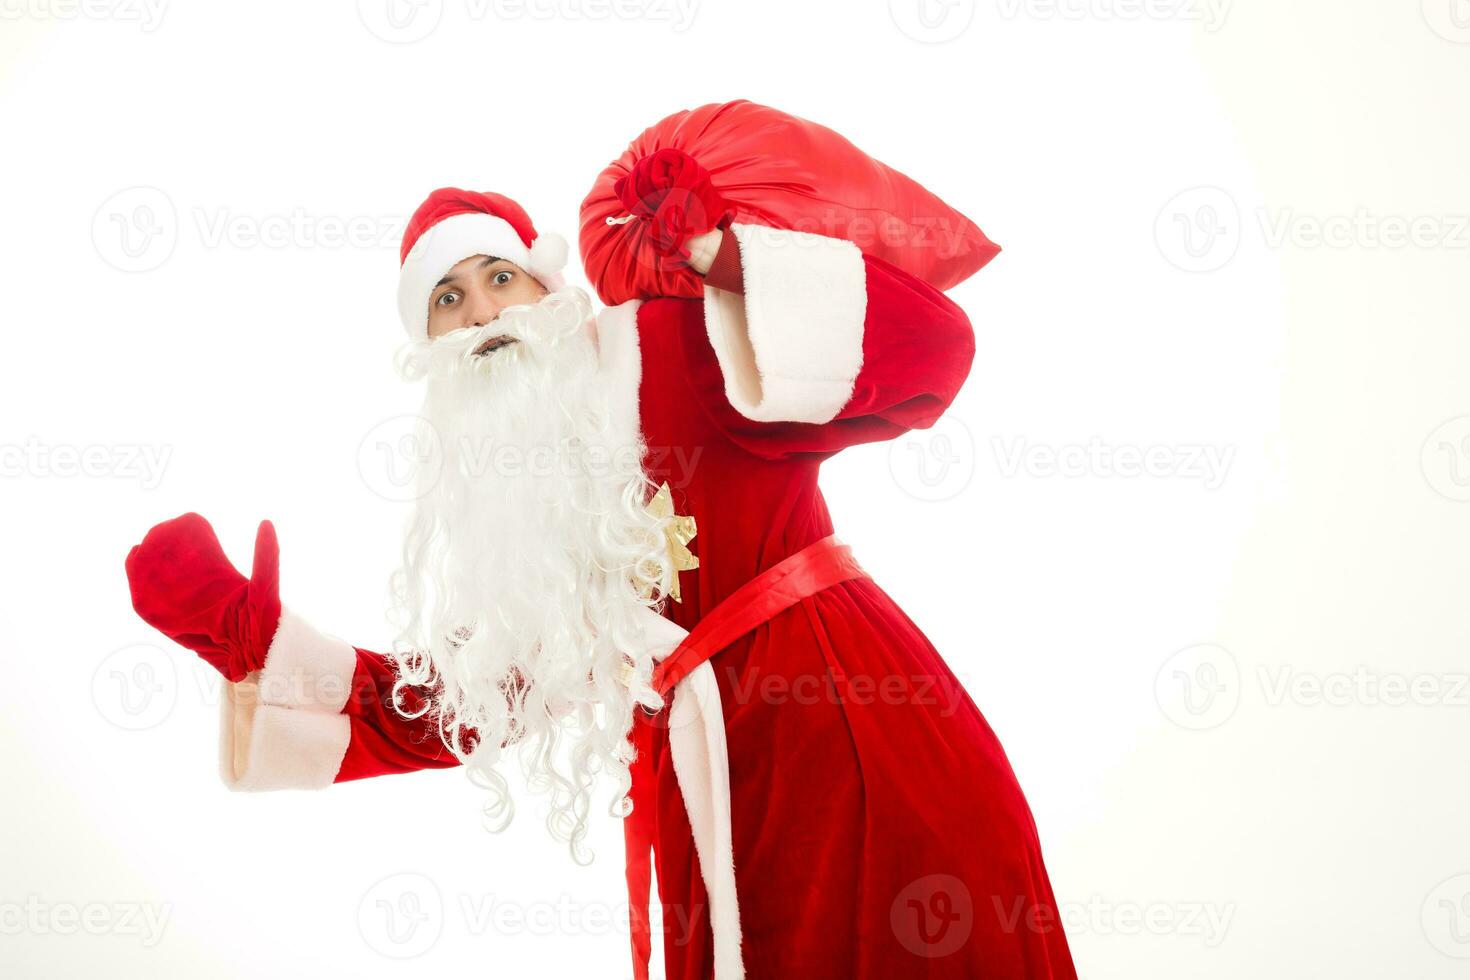 Santa Claus standing up on white background with his bag full of gifts photo